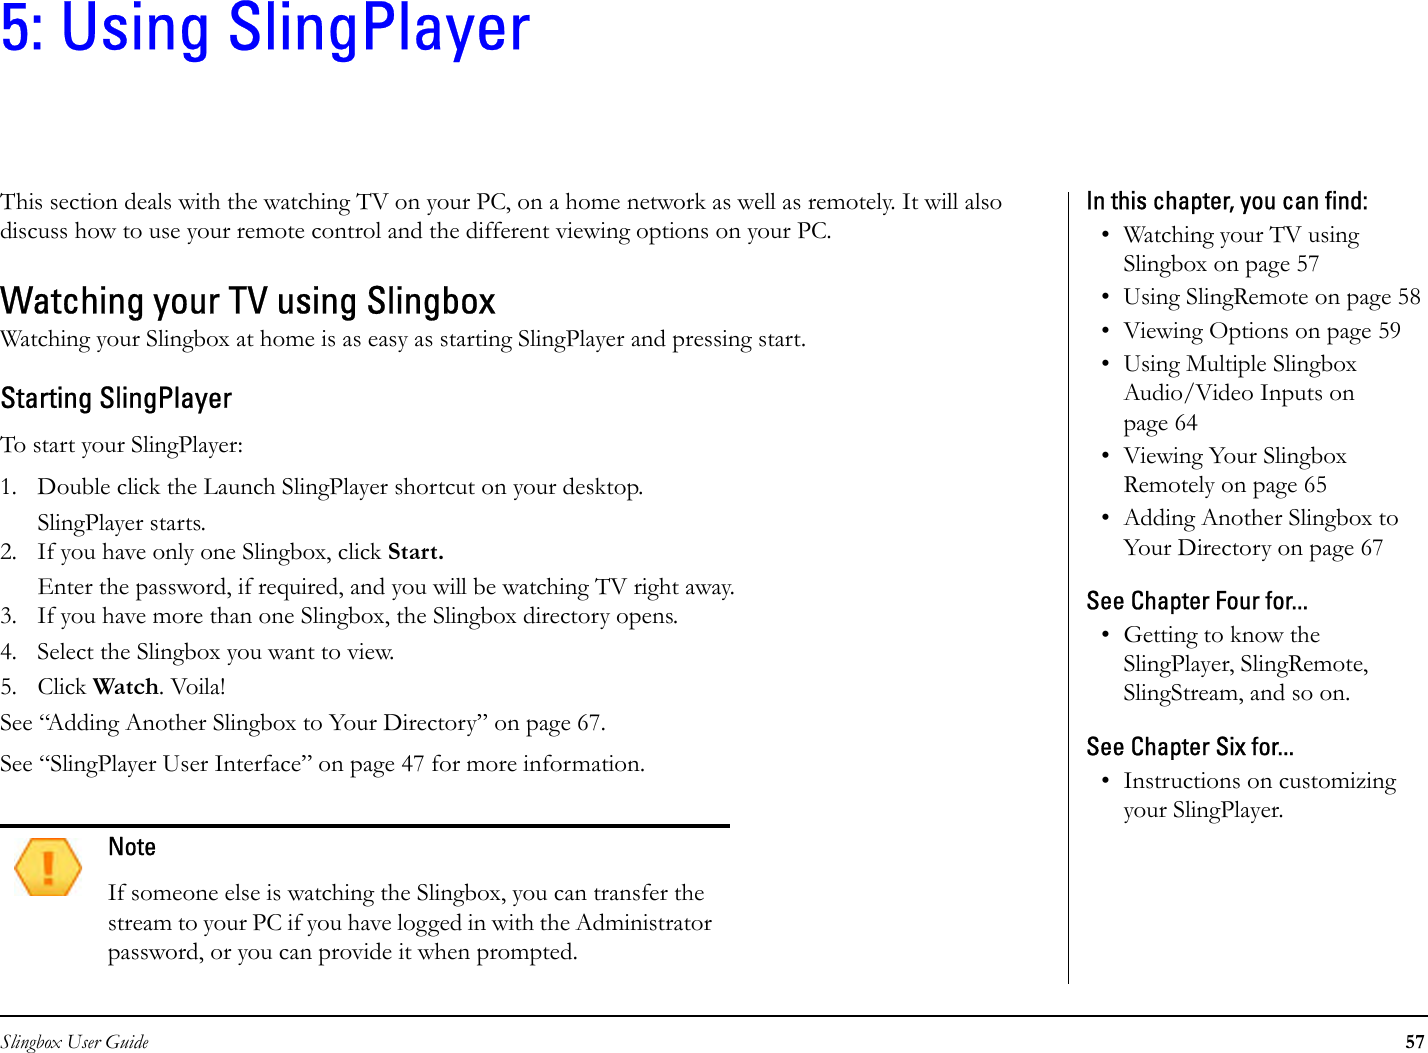 Slingbox User Guide 575: Using SlingPlayerThis section deals with the watching TV on your PC, on a home network as well as remotely. It will also discuss how to use your remote control and the different viewing options on your PC. Watching your TV using SlingboxWatching your Slingbox at home is as easy as starting SlingPlayer and pressing start.Starting SlingPlayerTo start your SlingPlayer:1. Double click the Launch SlingPlayer shortcut on your desktop. SlingPlayer starts. 2. If you have only one Slingbox, click Start.Enter the password, if required, and you will be watching TV right away.3. If you have more than one Slingbox, the Slingbox directory opens.4. Select the Slingbox you want to view.5. Click Watch. Voila!See “Adding Another Slingbox to Your Directory” on page 67.See “SlingPlayer User Interface” on page 47 for more information.NoteIf someone else is watching the Slingbox, you can transfer the stream to your PC if you have logged in with the Administrator password, or you can provide it when prompted.In this chapter, you can find: • Watching your TV using Slingbox on page 57• Using SlingRemote on page 58• Viewing Options on page 59• Using Multiple Slingbox Audio/Video Inputs on page 64• Viewing Your Slingbox Remotely on page 65• Adding Another Slingbox to Your Directory on page 67See Chapter Four for...• Getting to know the SlingPlayer, SlingRemote, SlingStream, and so on.See Chapter Six for...• Instructions on customizing your SlingPlayer.